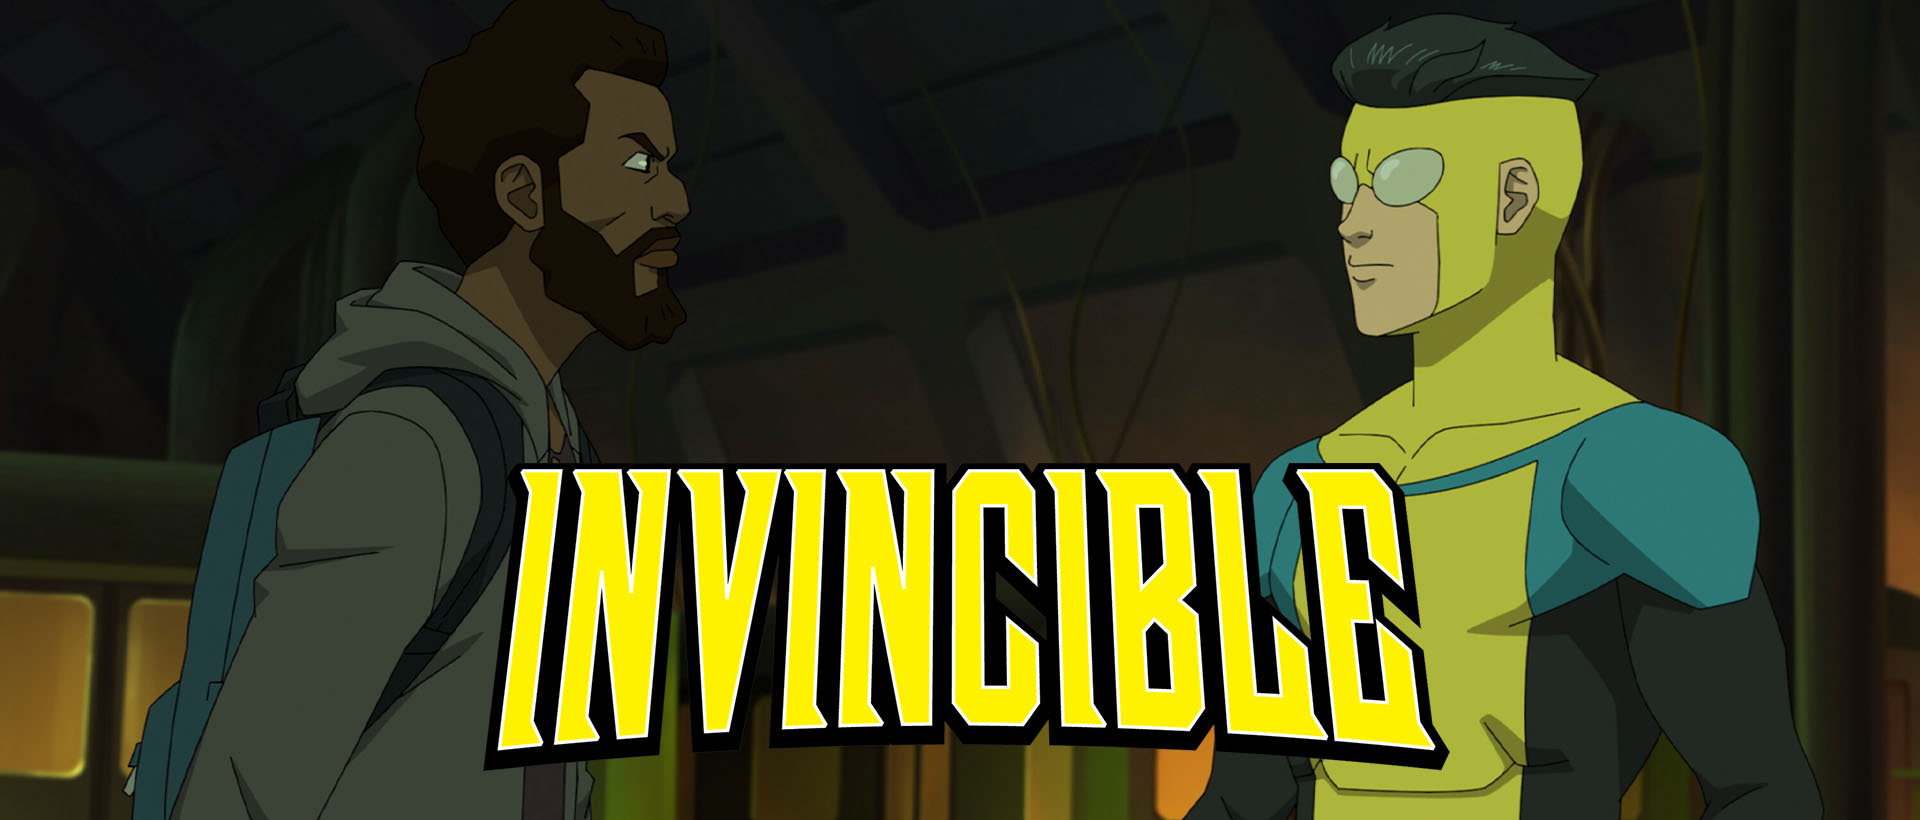 Invincible Season 2 Episode 3 Review - But Why Tho?